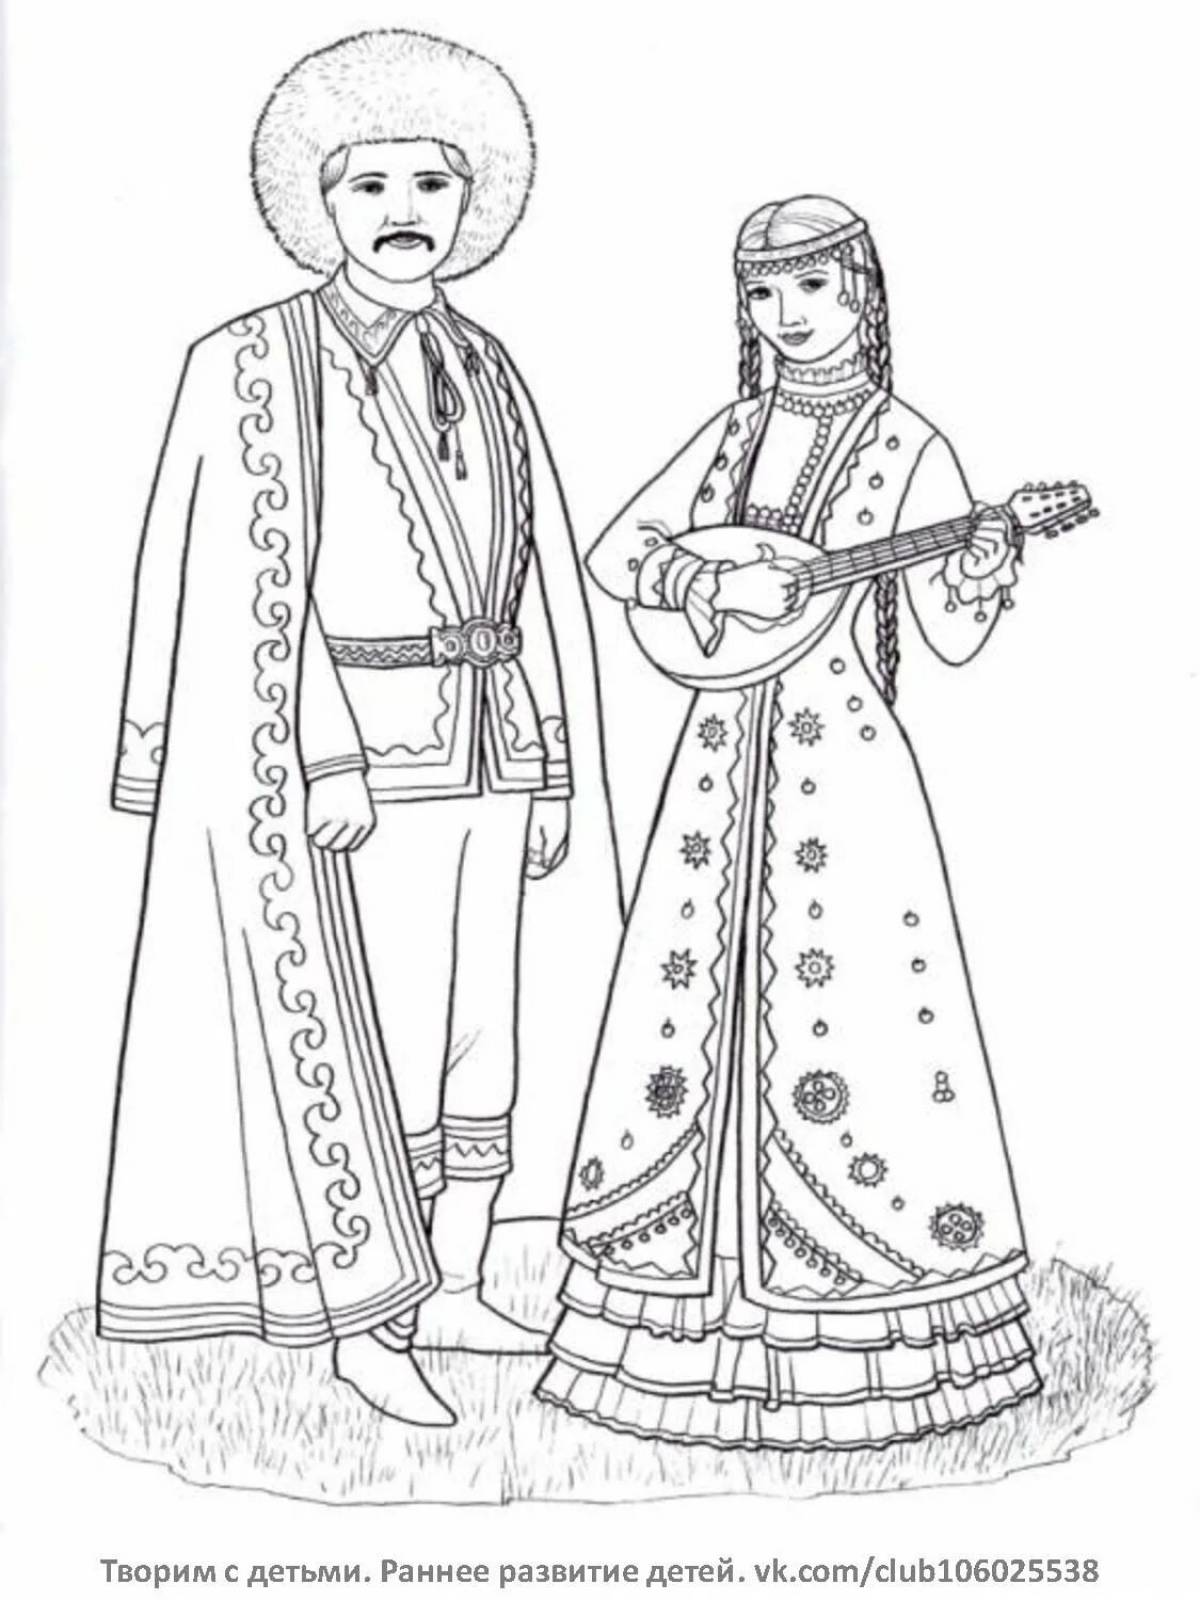 Costumes of the peoples of Russia for children for printing #21